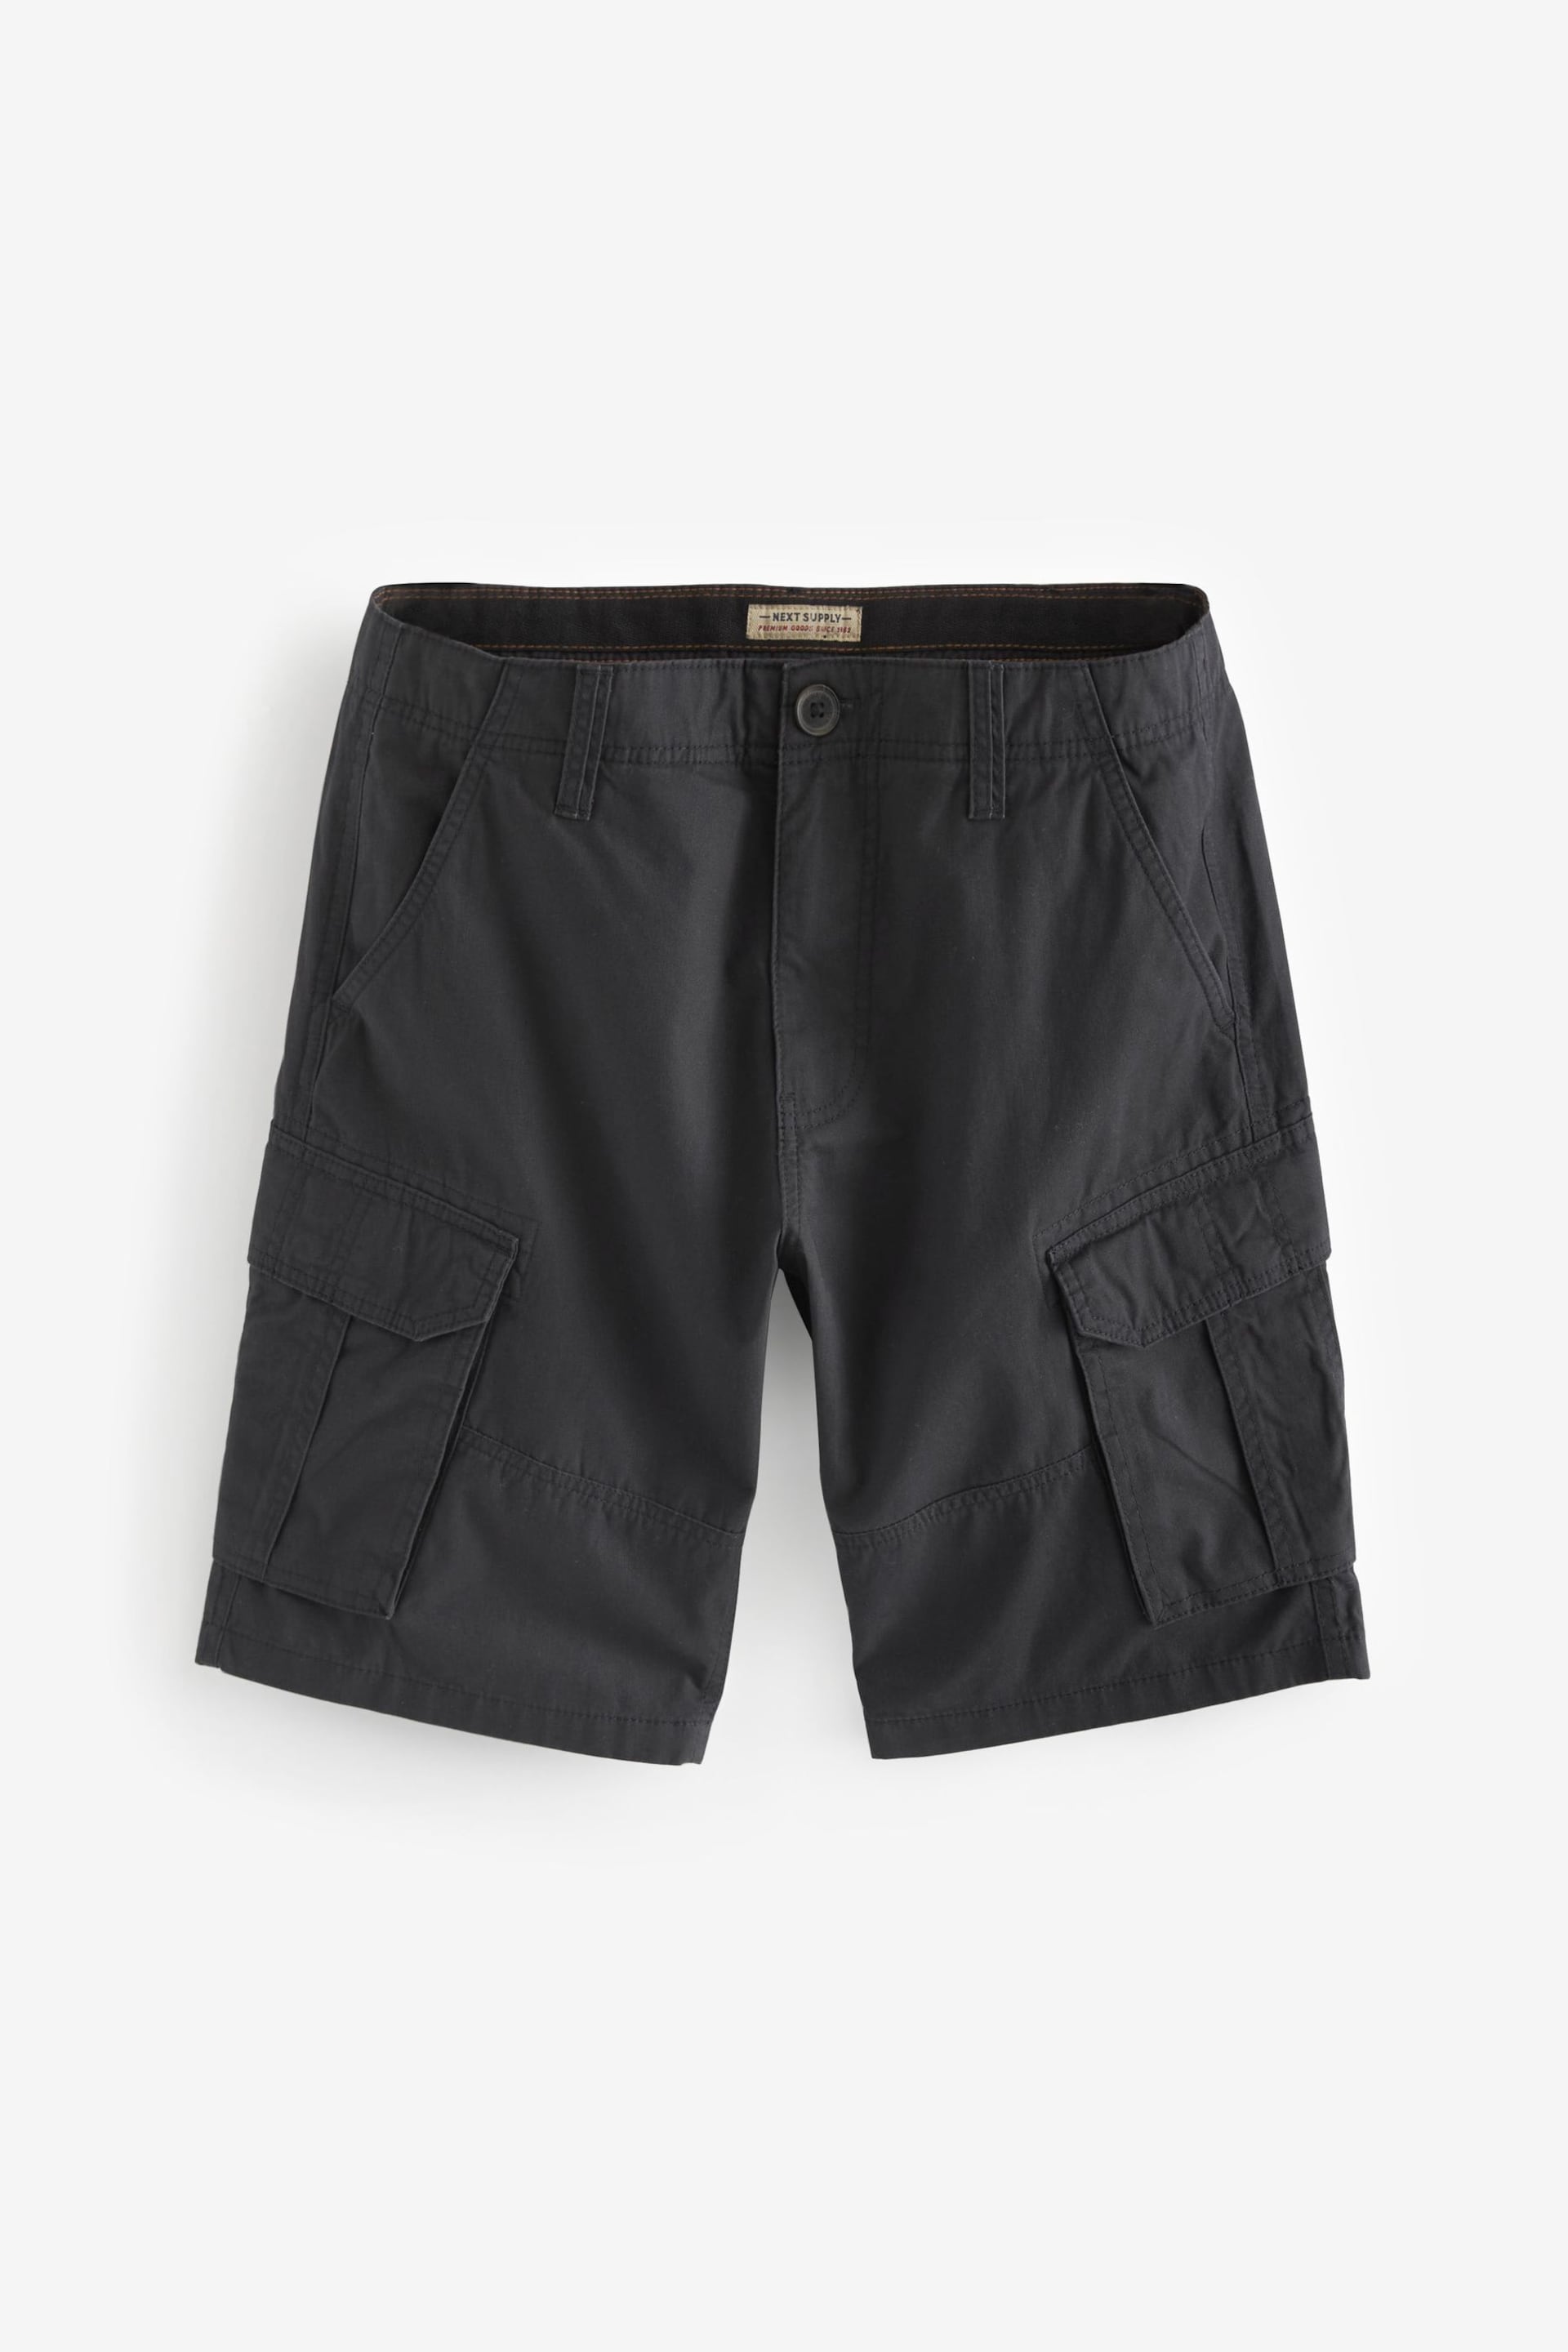 Navy Blue/Stone Natural Cargo Shorts 2 Pack - Image 8 of 13